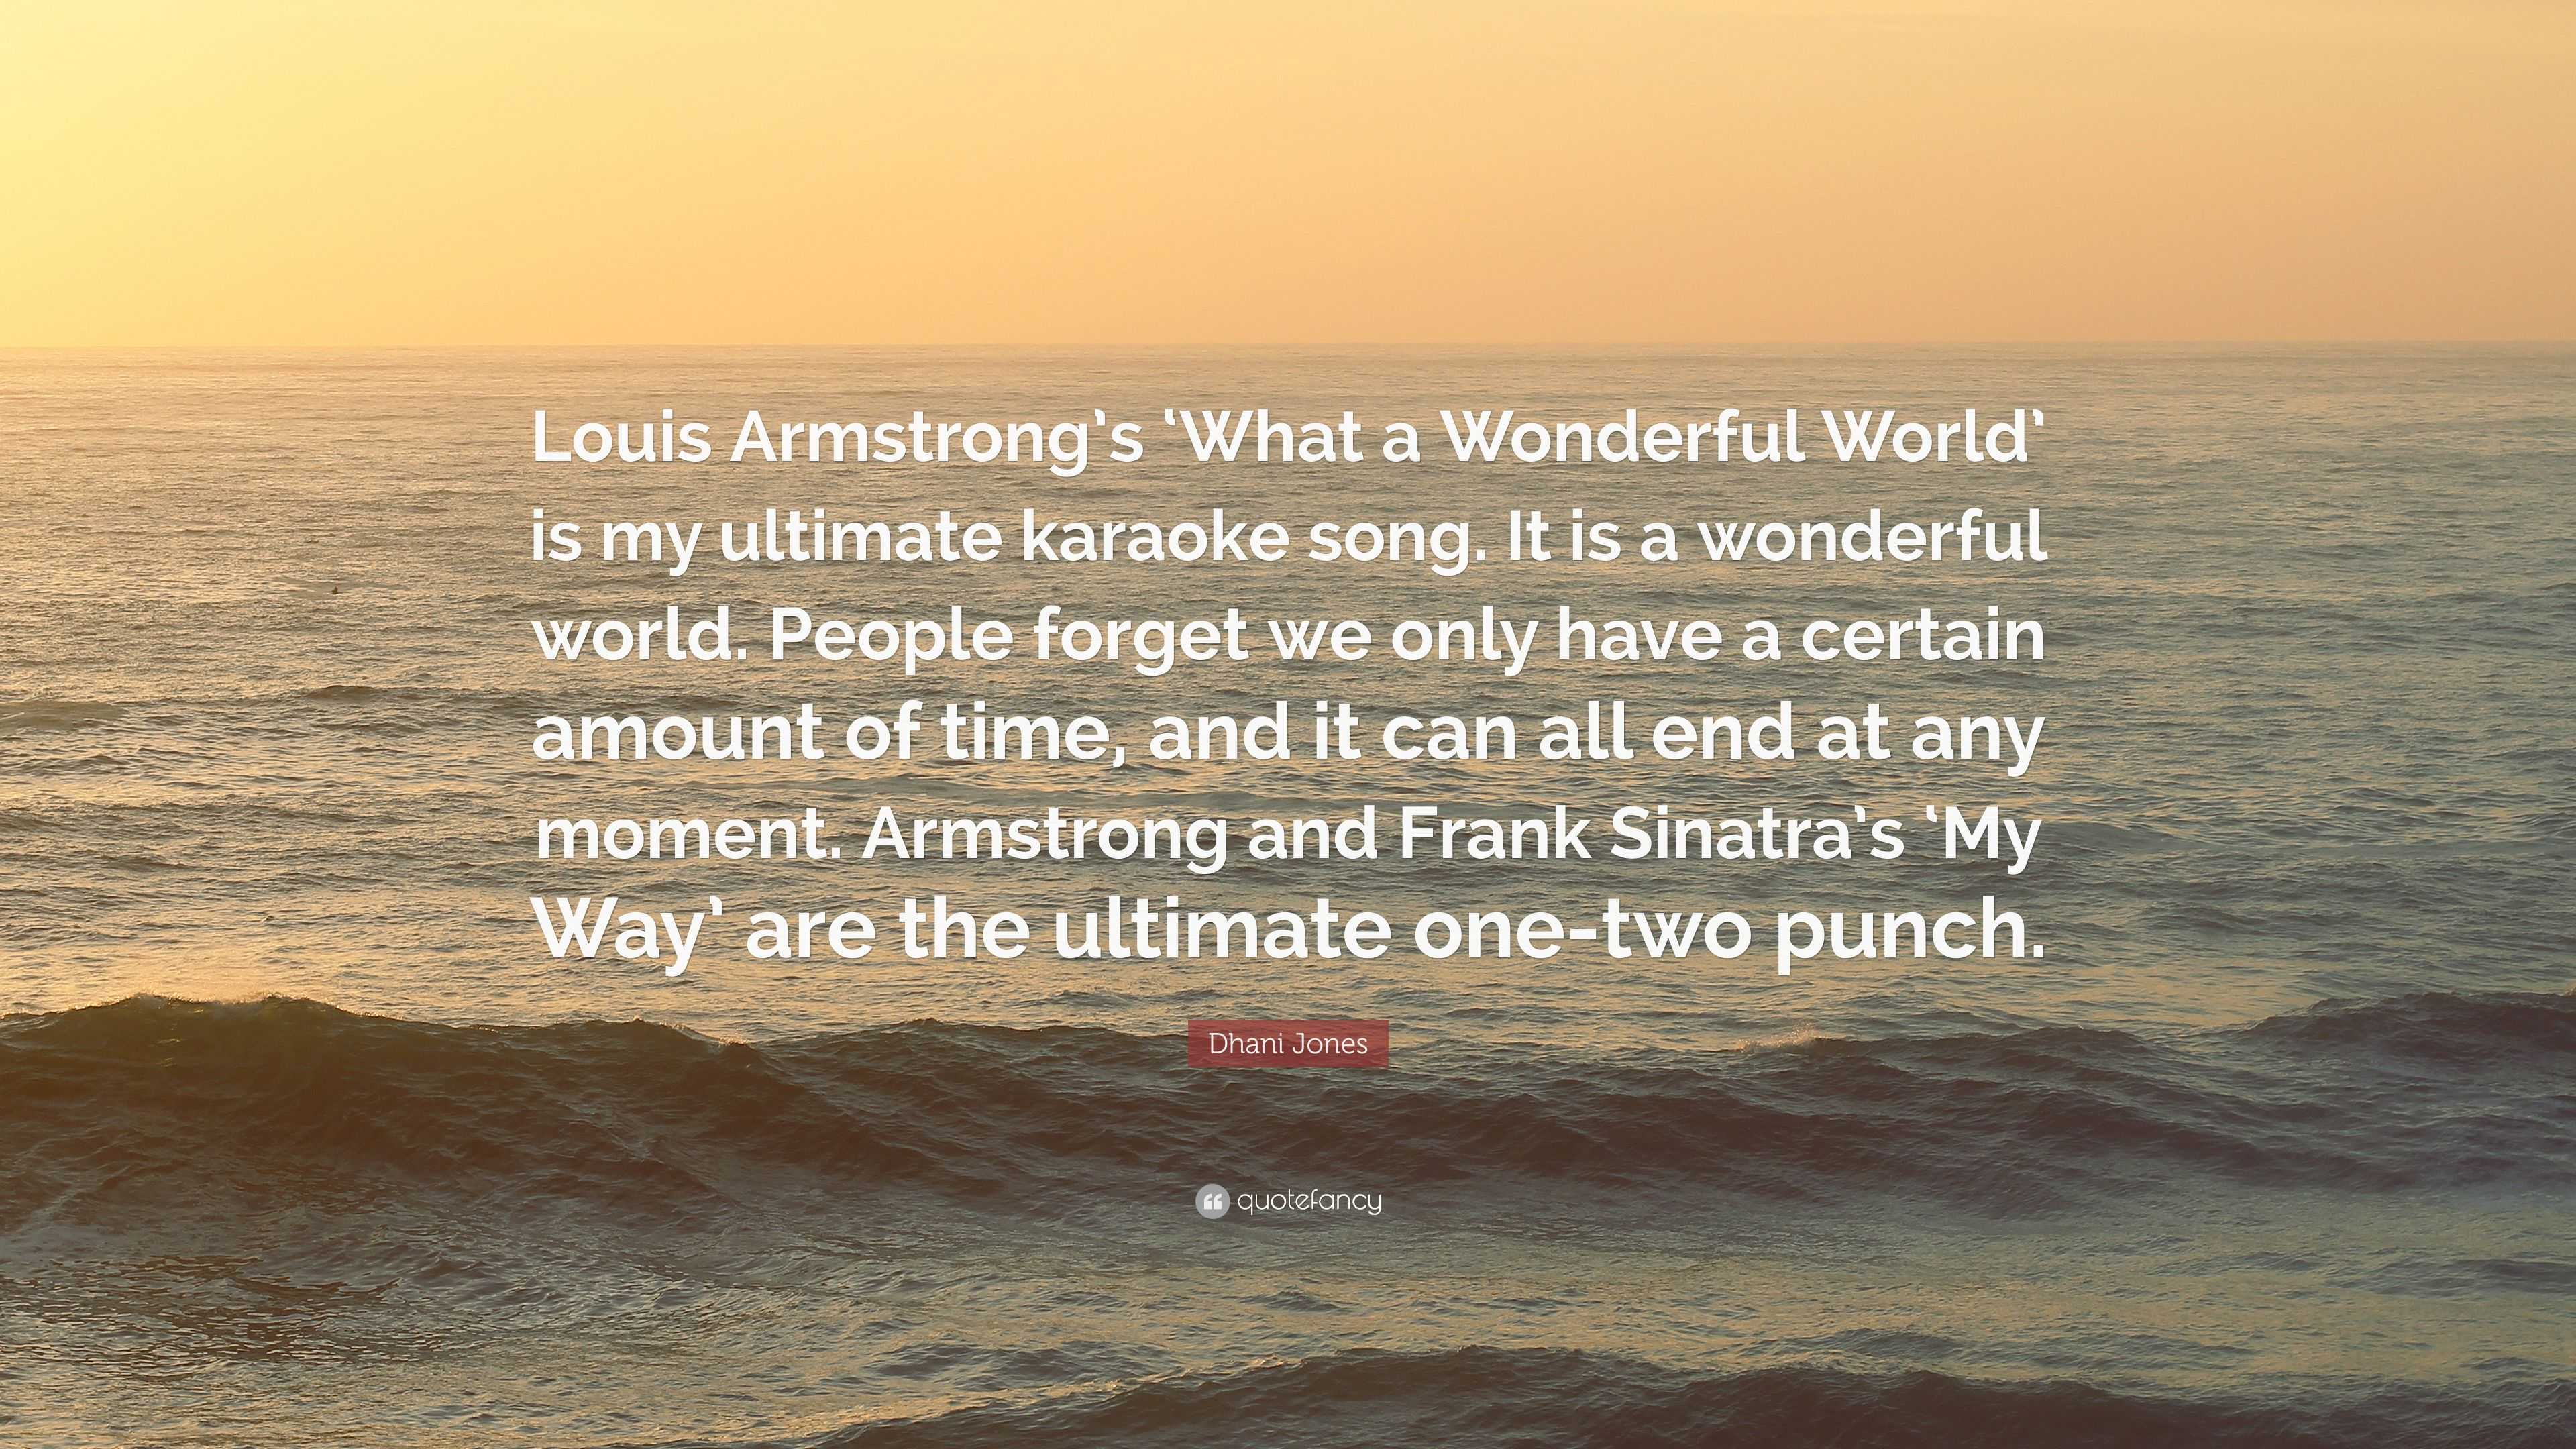 Dhani Jones quote: Louis Armstrong's 'What a Wonderful World' is my  ultimate karaoke